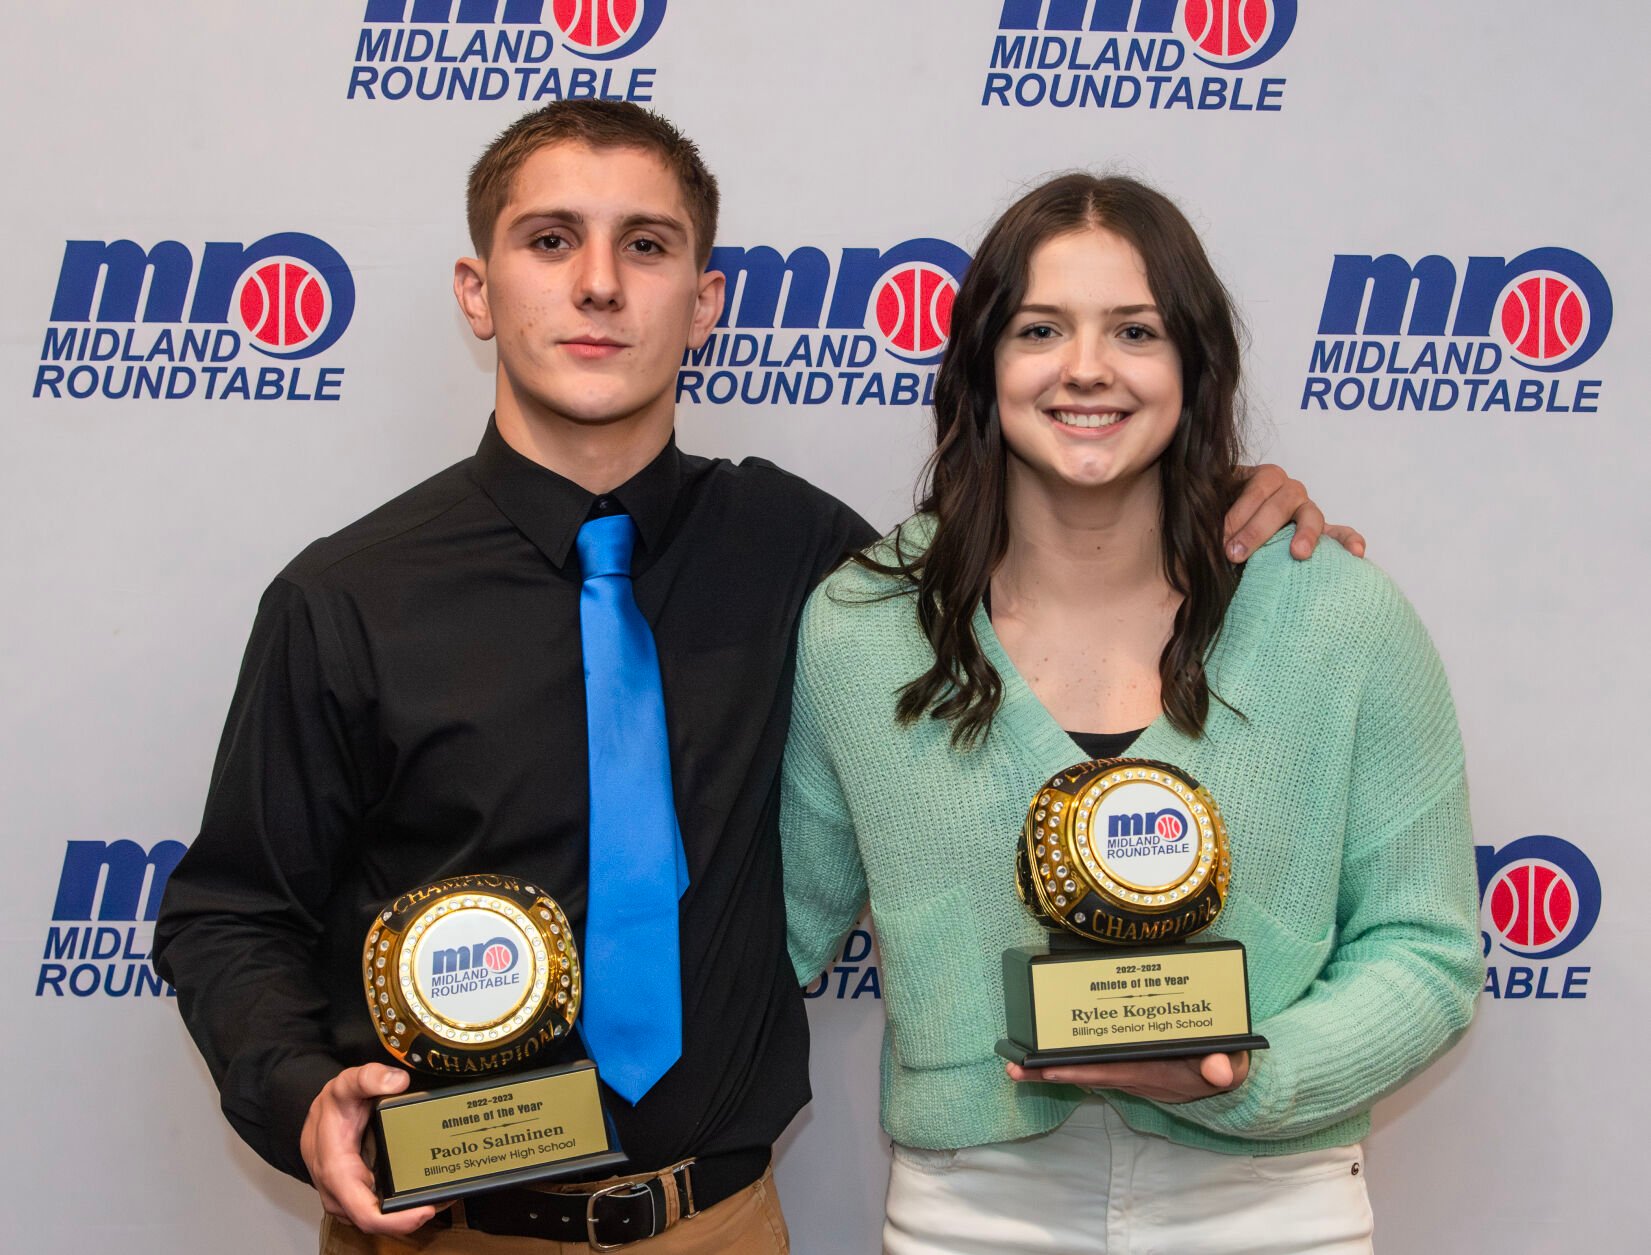 Paolo Salminen and Rylee Kogolshak win Midland Roundtable Athlete of the Year awards